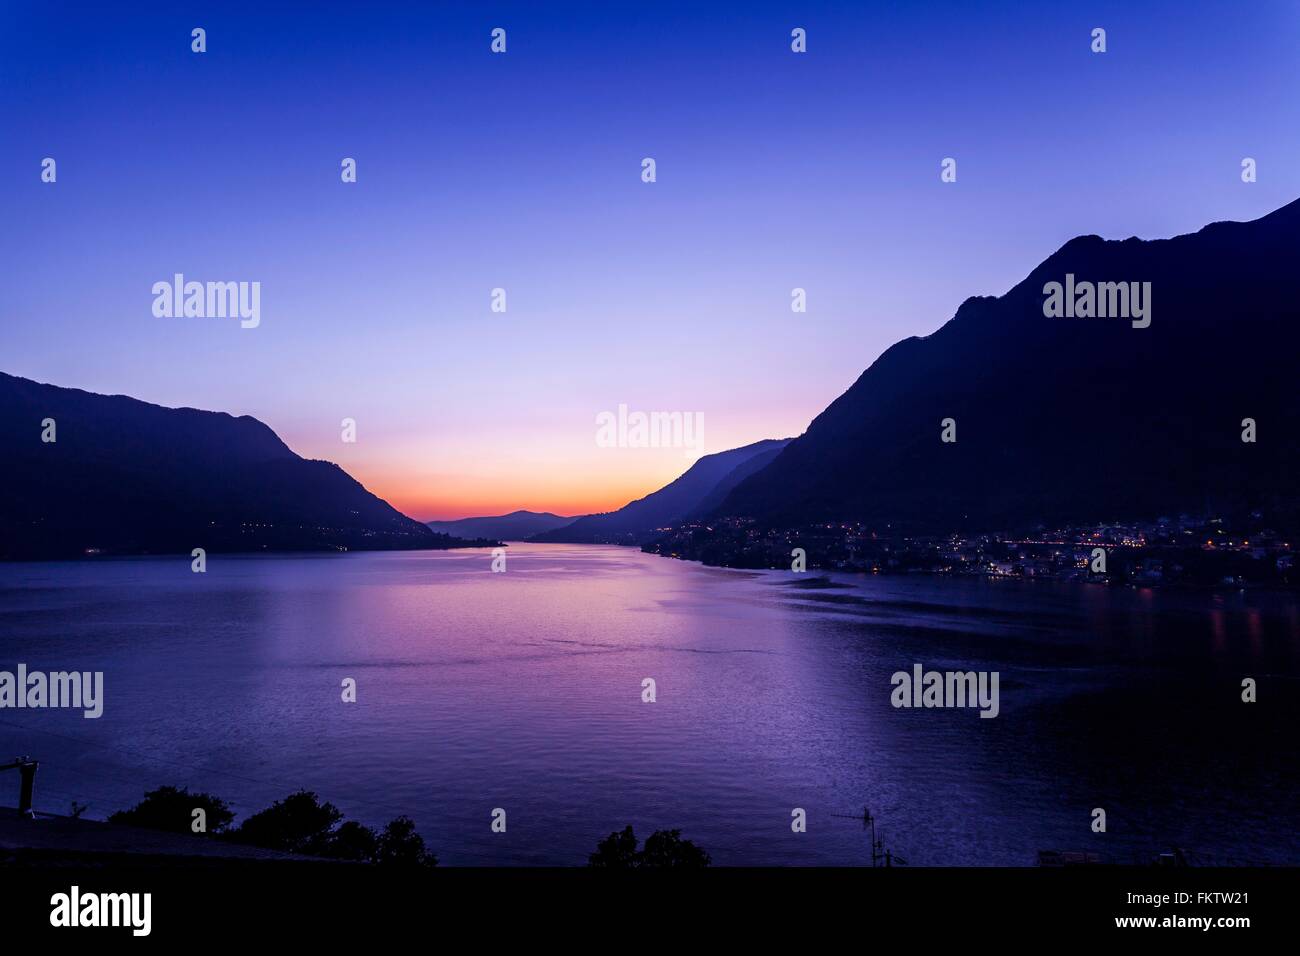 Lake with silhouetted mountains at sunset, Pognana Lario, Lombardy, Italy Stock Photo